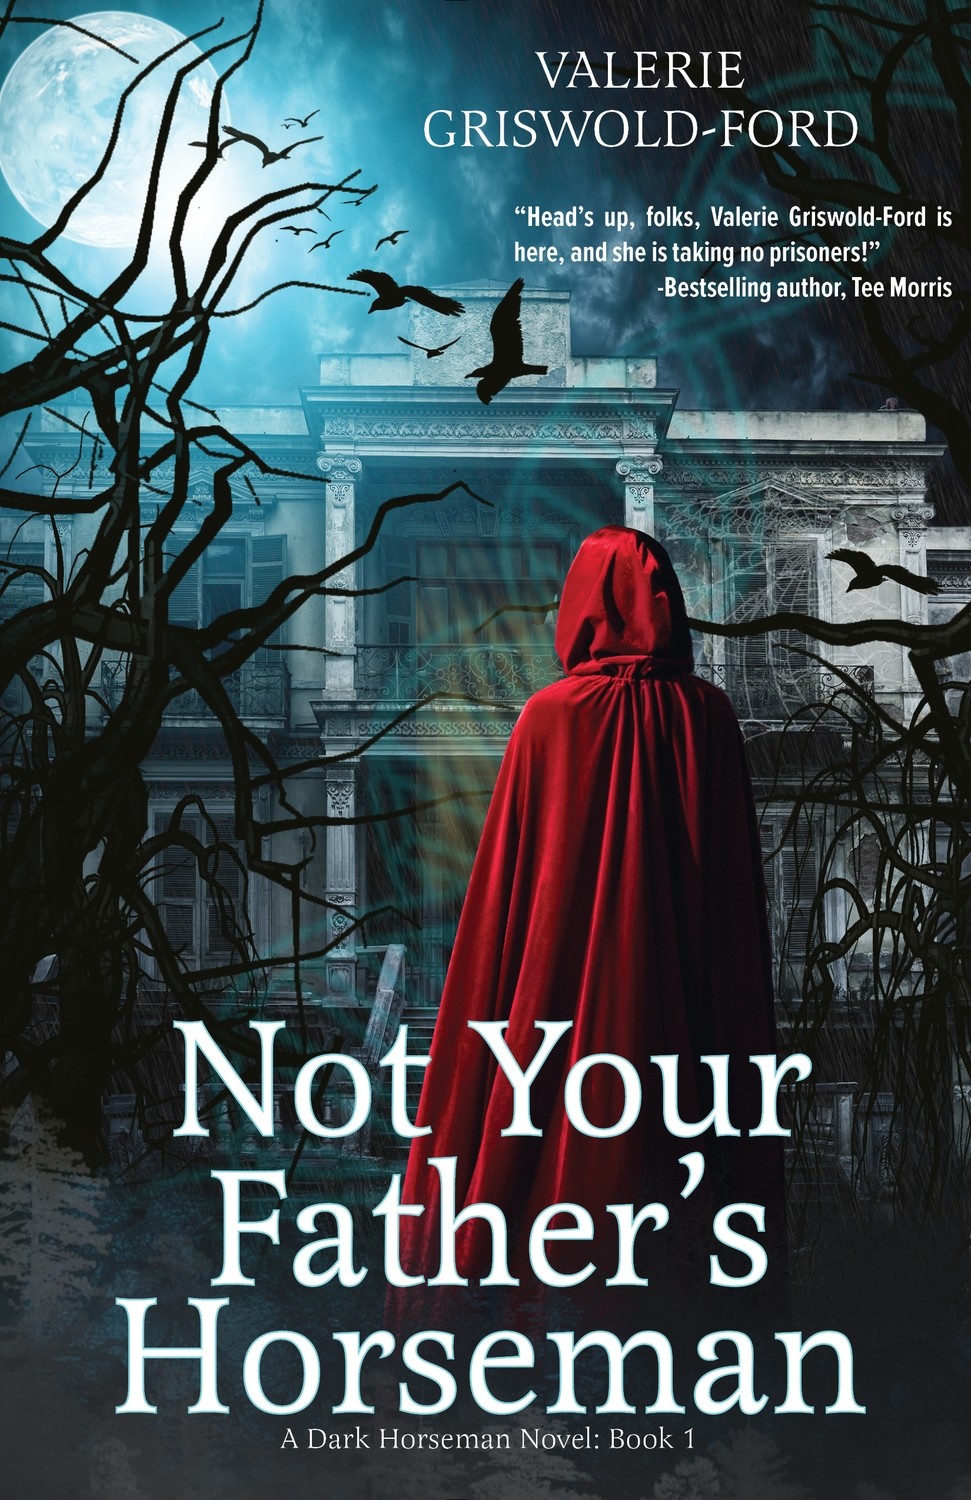 Not Your Father's Horseman by Valerie Griswold-Ford